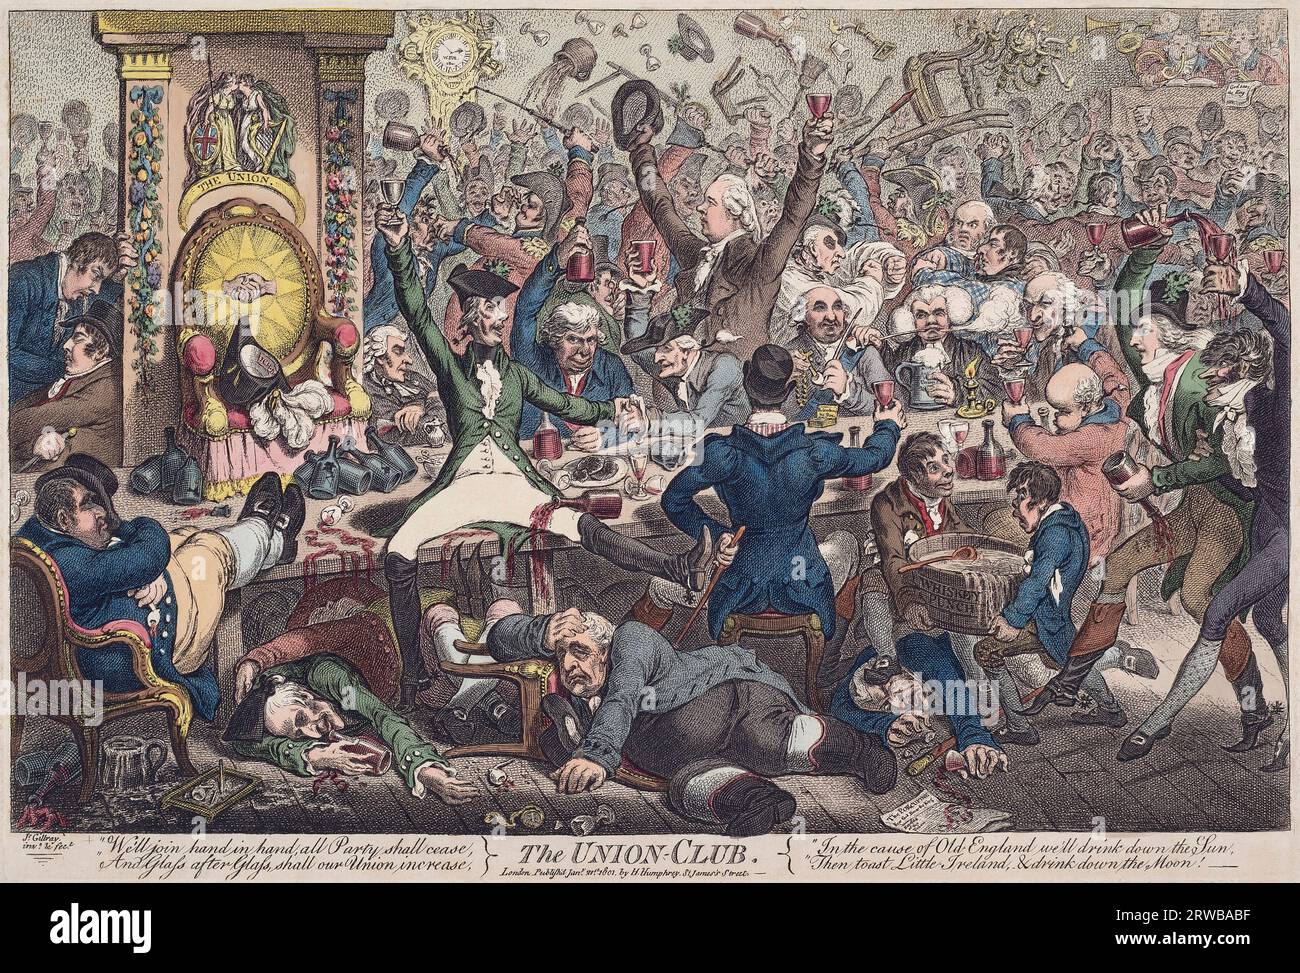 The Union Club.  An 1801 satire by James Gillray on the effects of the Acts of Union 1800 when the Parliaments of Great Britain and Ireland merged to form the Parliament of the United Kingdom.  The apparant bonhomie in the foreground between various political figures is contrasted with the brawling in the background. Stock Photo